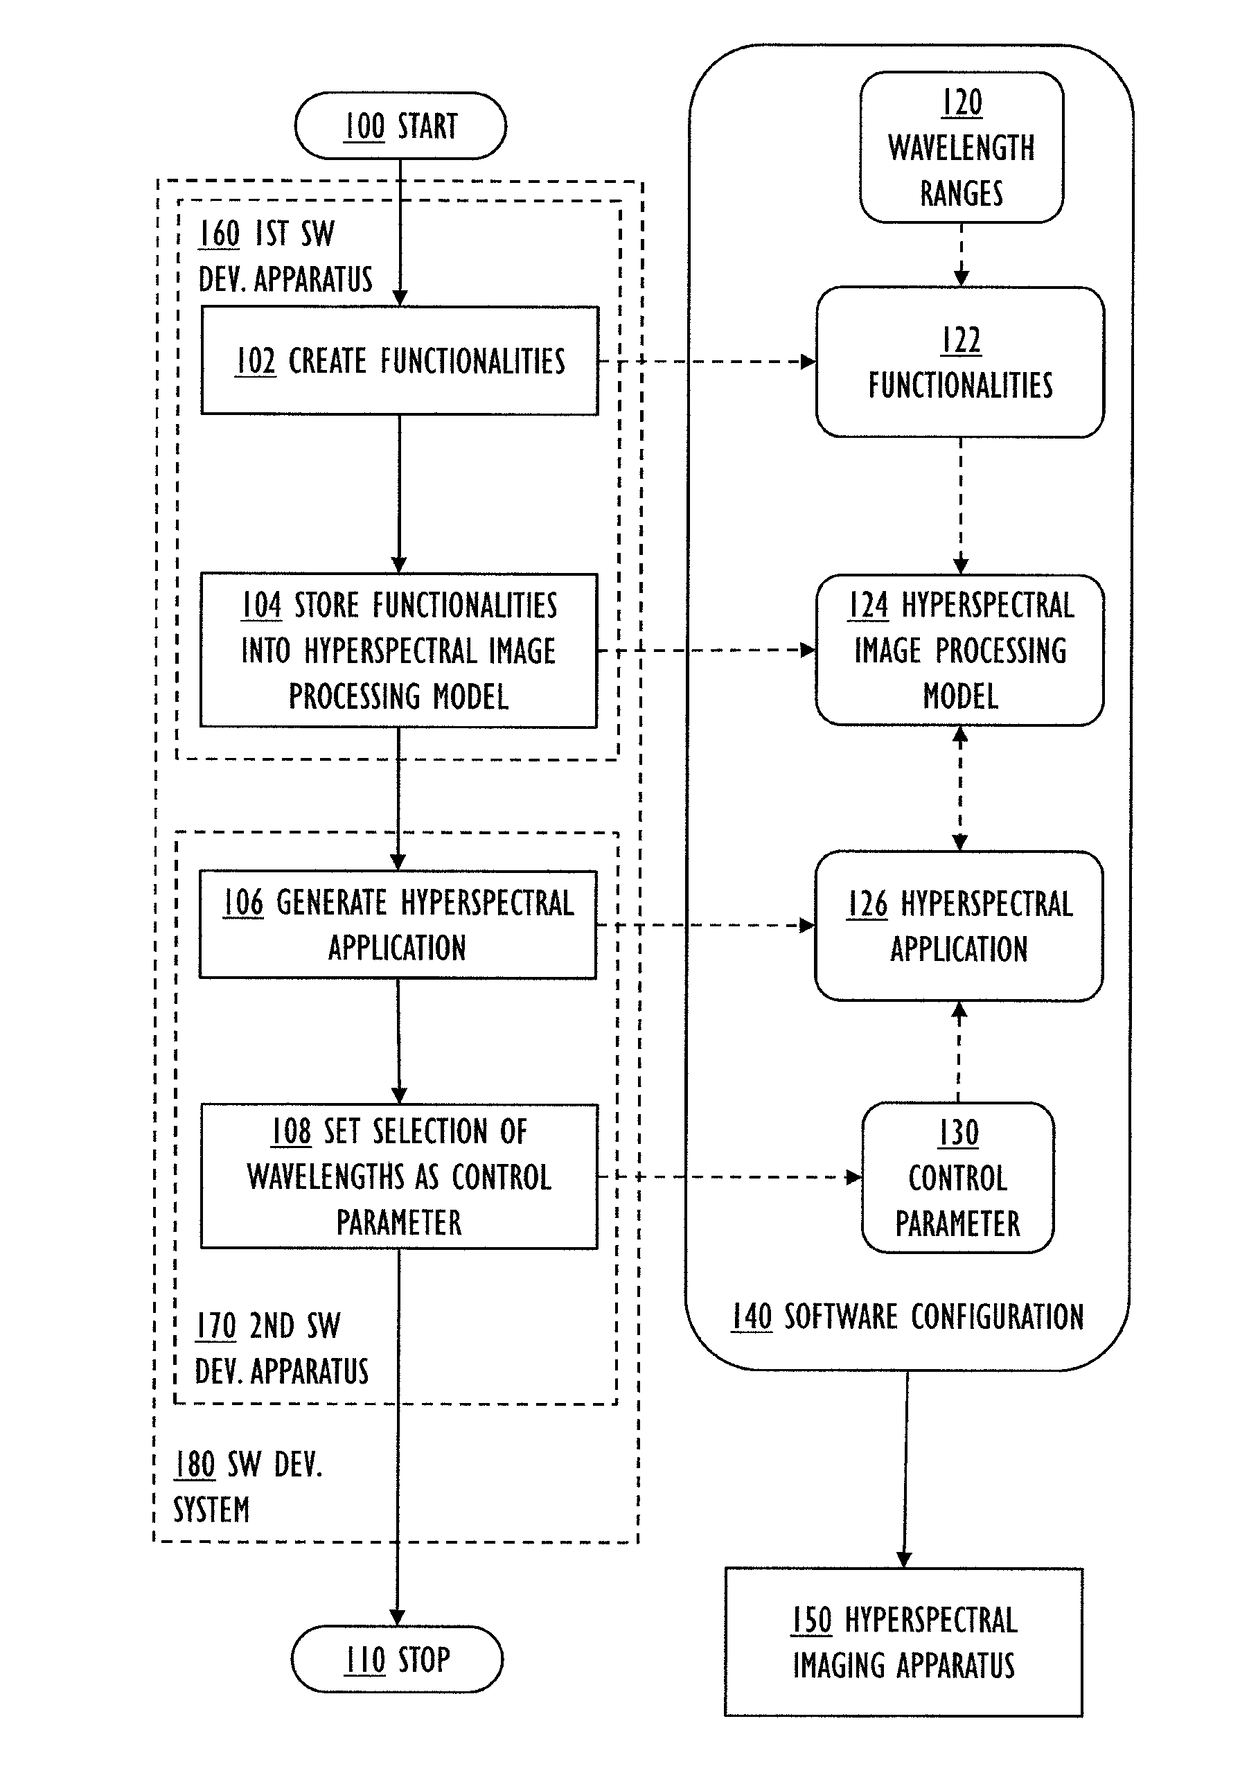 Defining software configuration for hyperspectral imaging apparatus